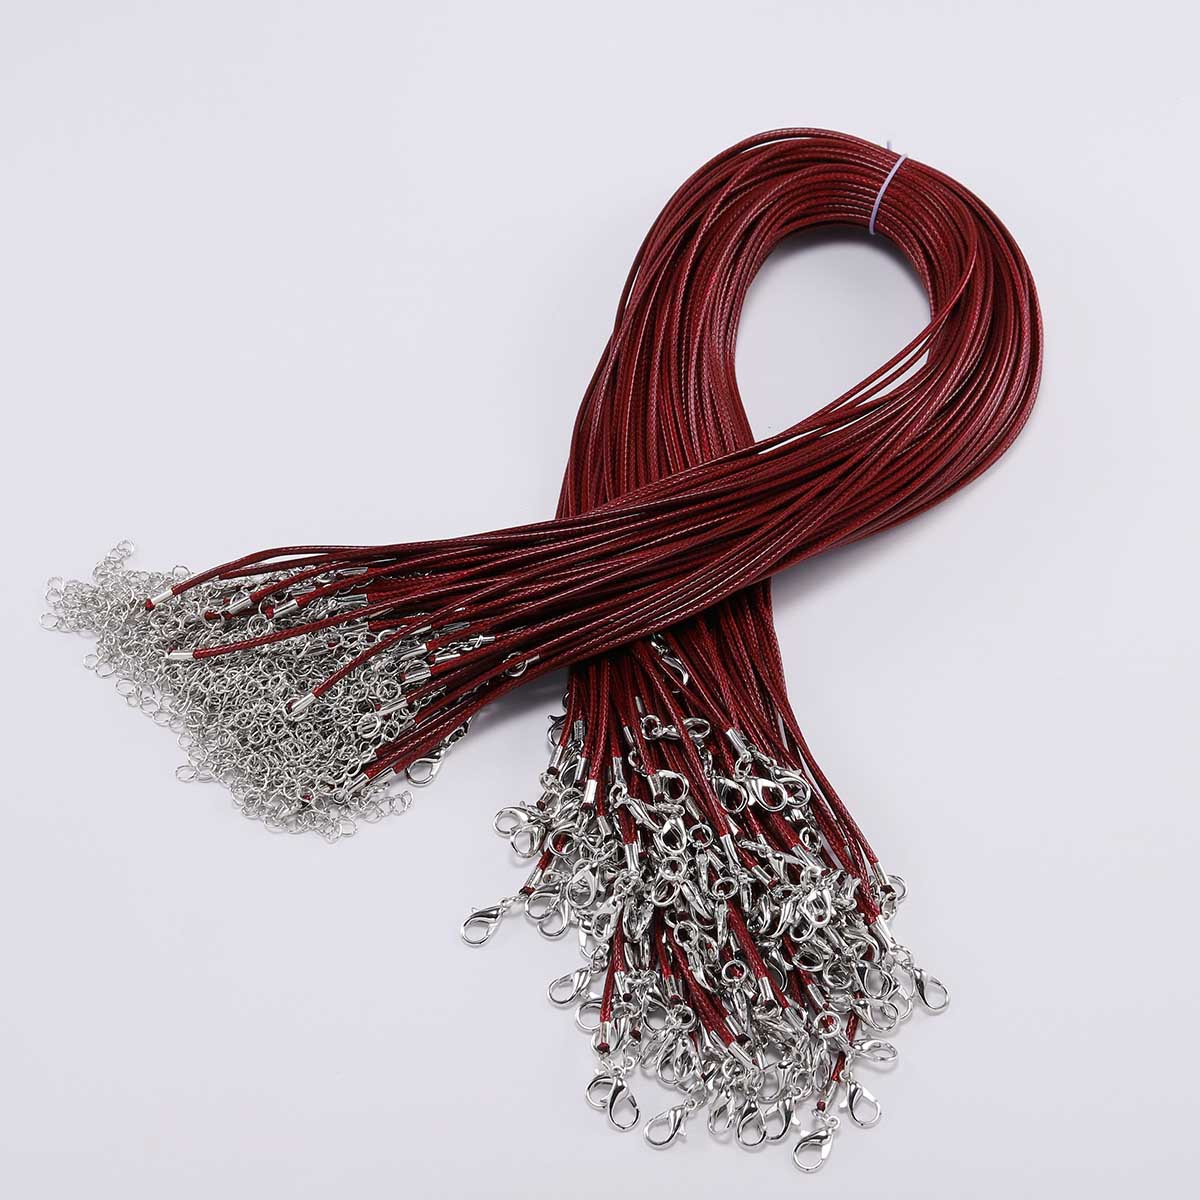 Handmade Red Cord Necklace Rope Braided Silk Cord Necklace for Pendant  Charm Diy